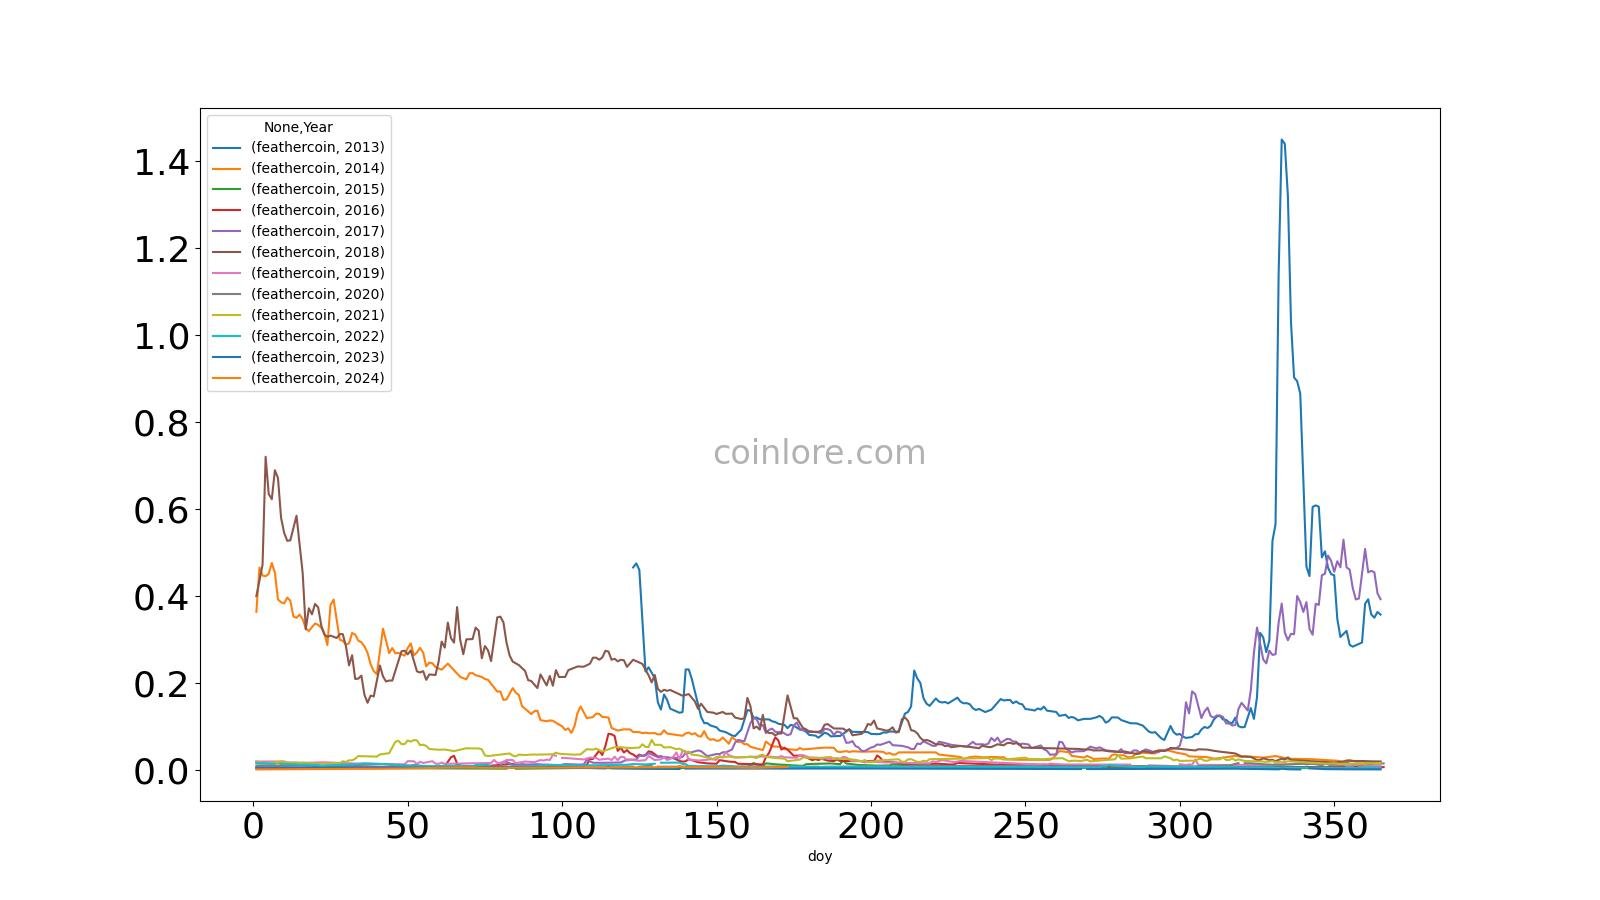 Moneyness: Why did Dogecoin take off but Feathercoin didn't?